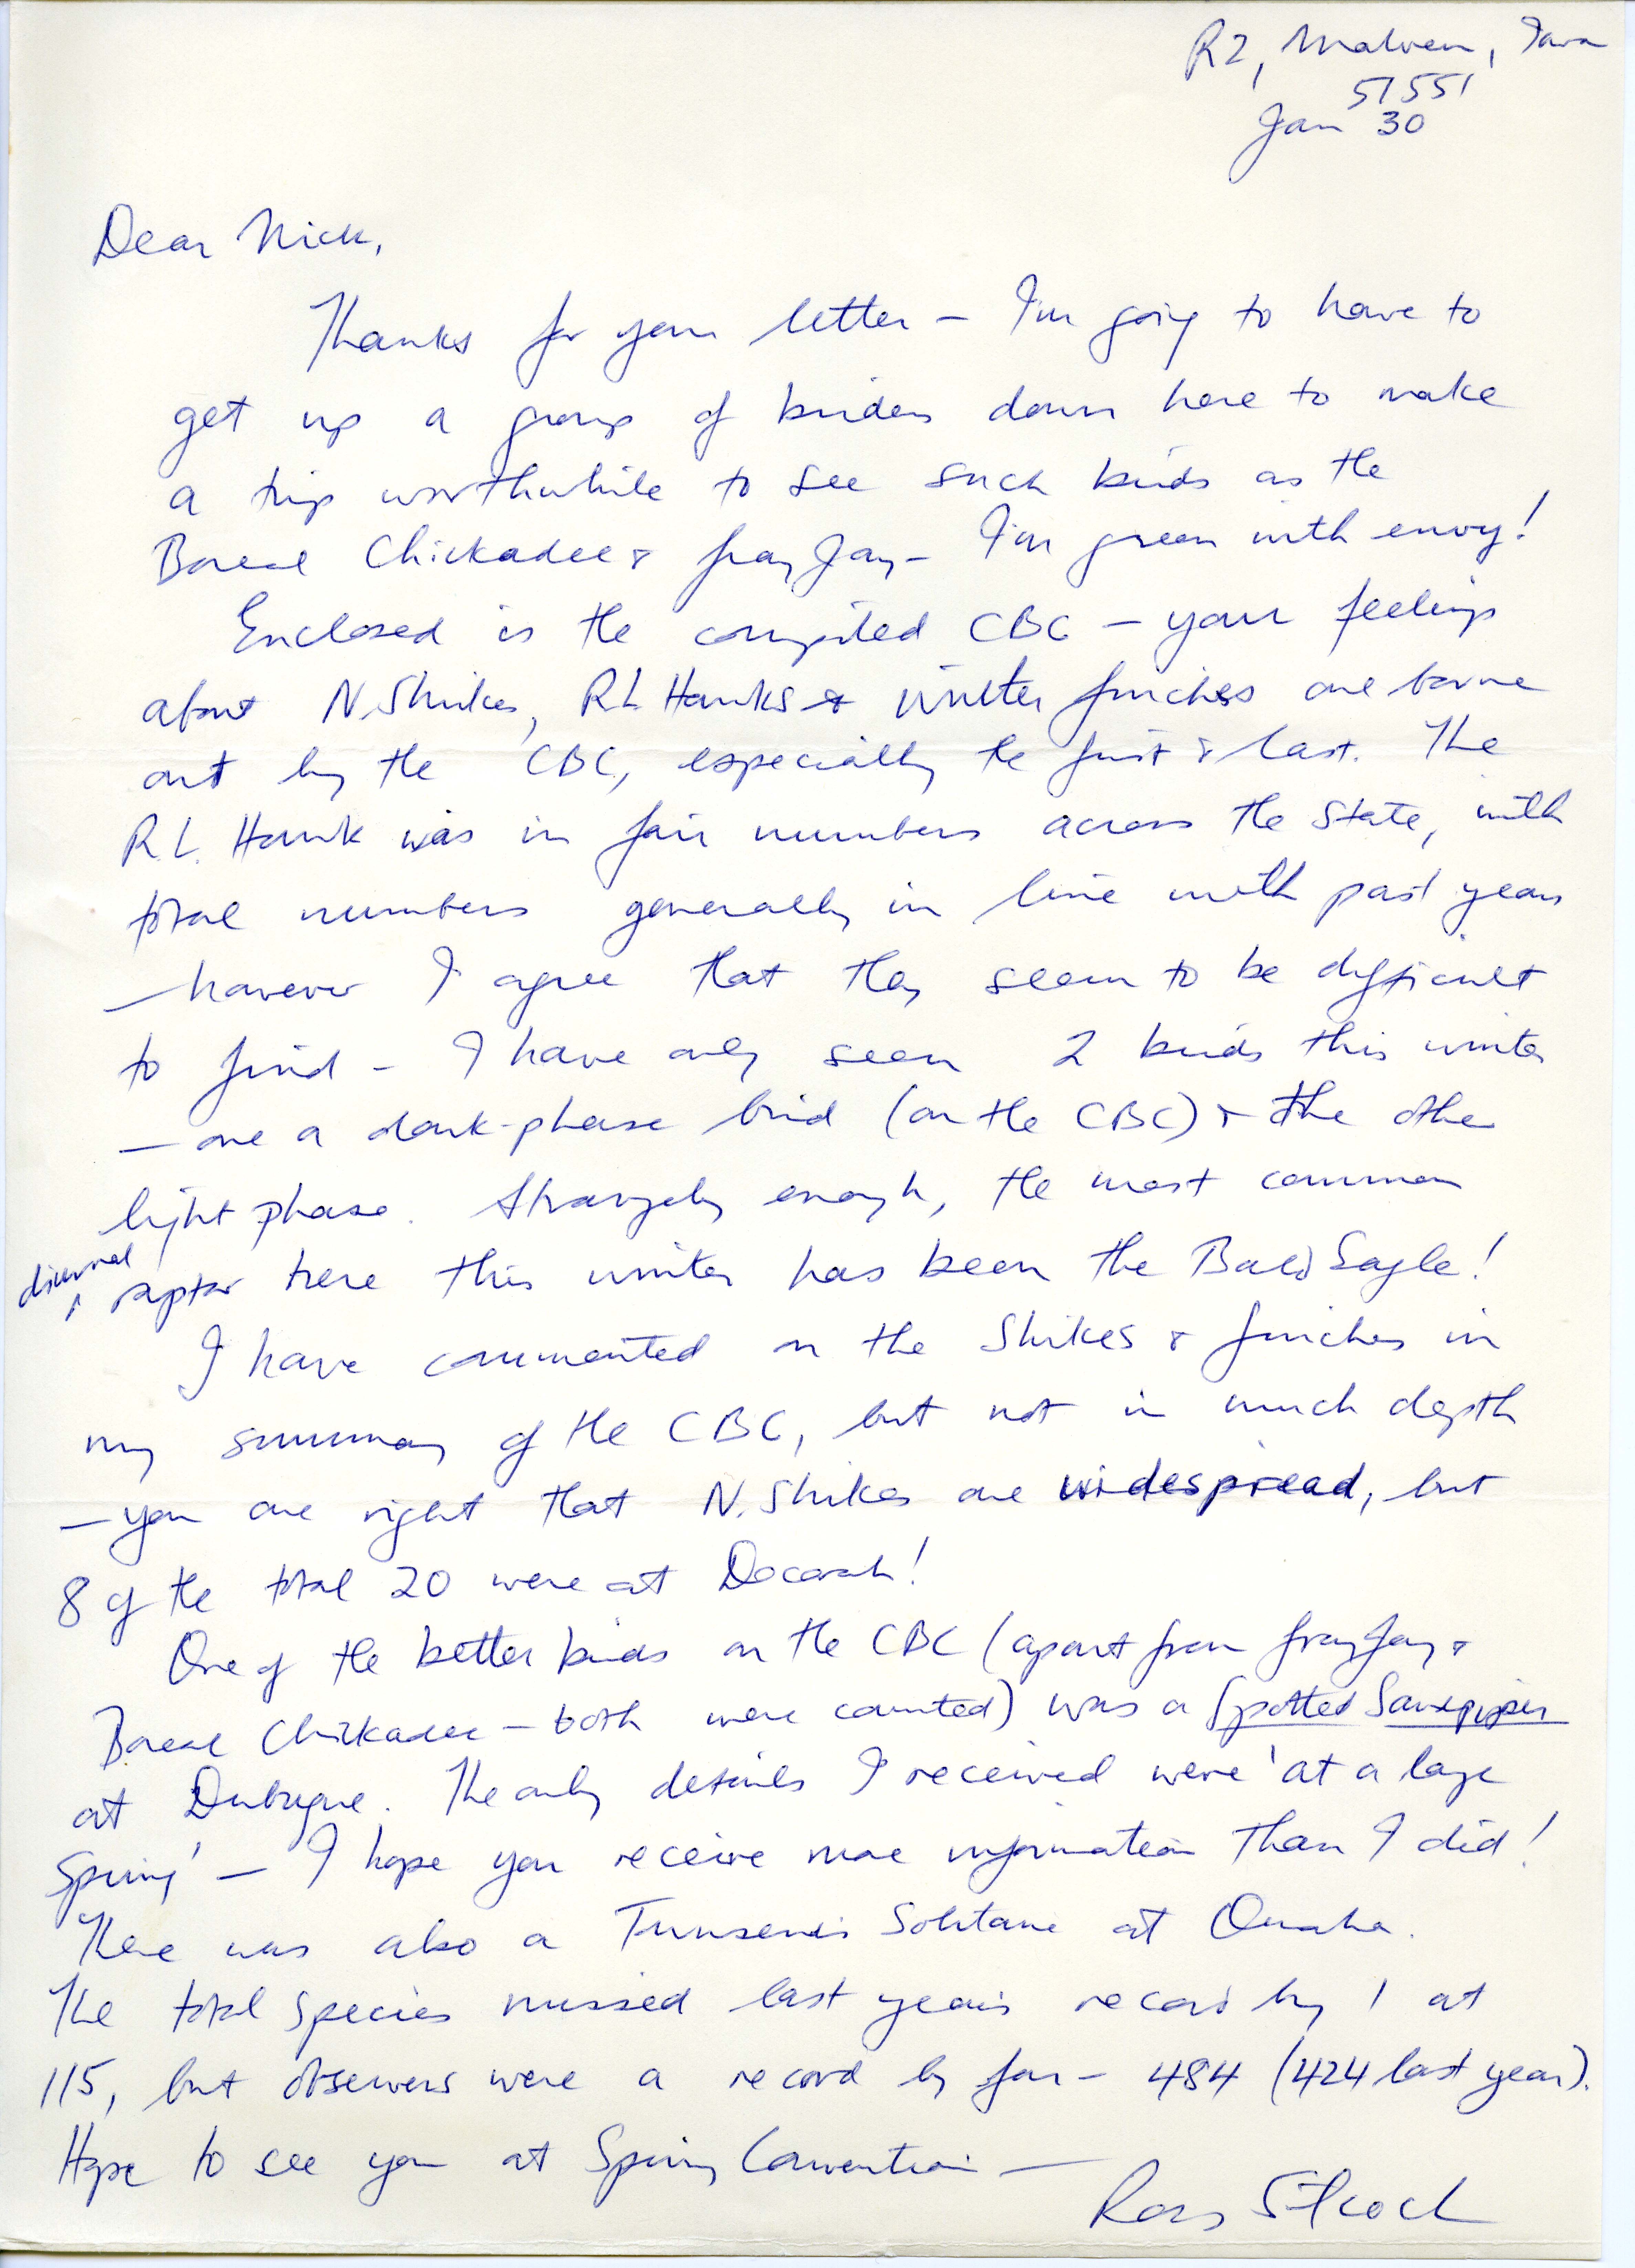 W. Ross Silcock letter to Nicholas S. Halmi regarding highlights of the Christmas bird count, January 30, 1977